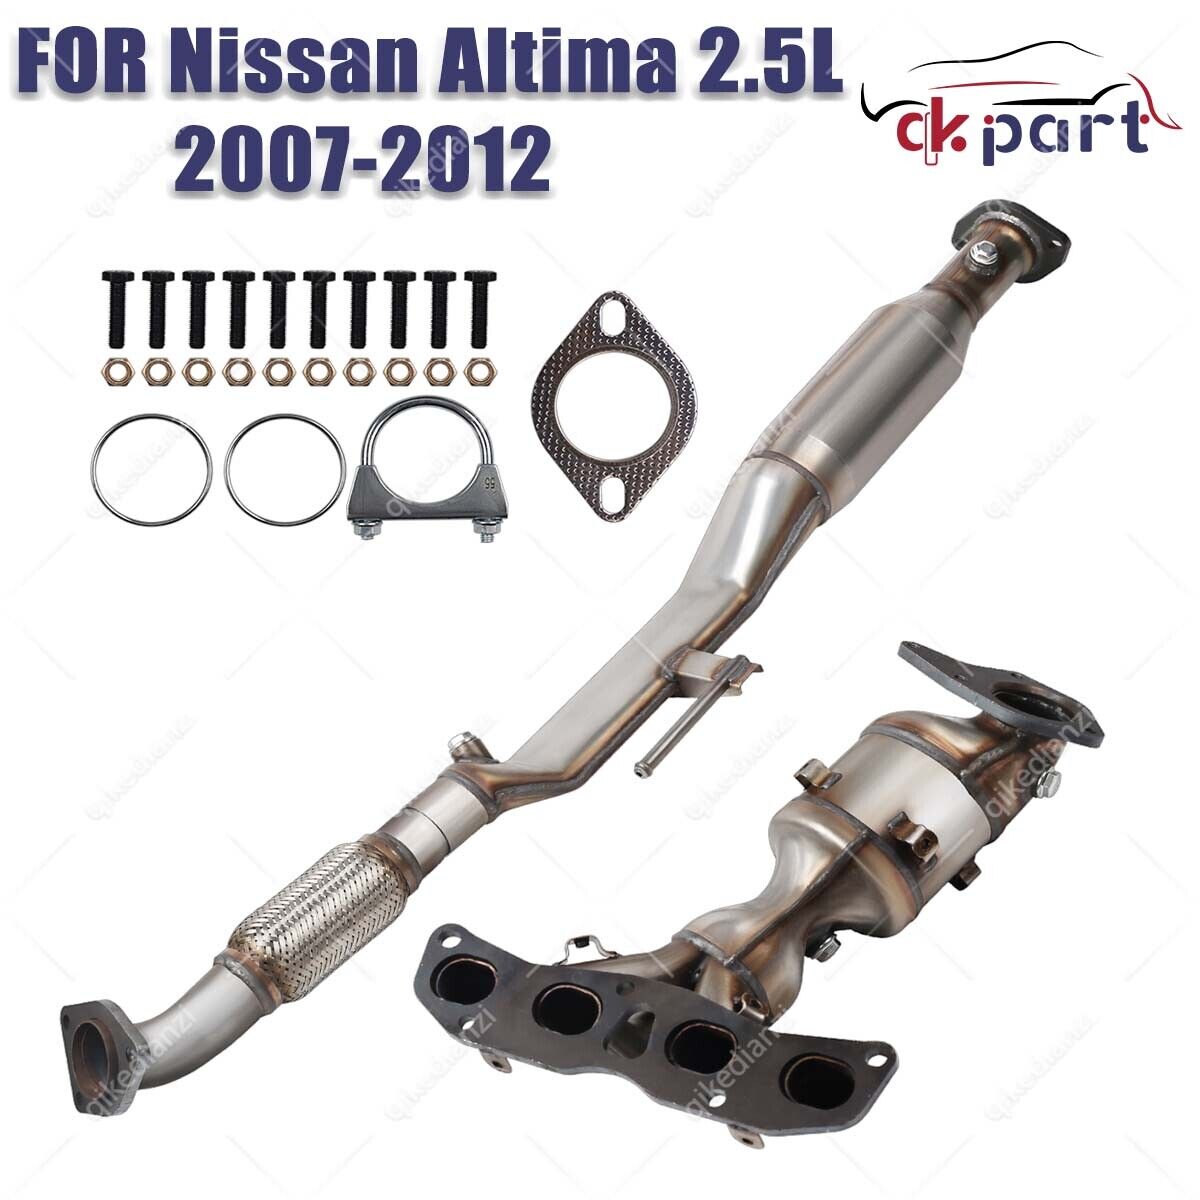 Both Catalytic Converters for 2007-2012 Nissan Altima 2.5L Manifold and Flex